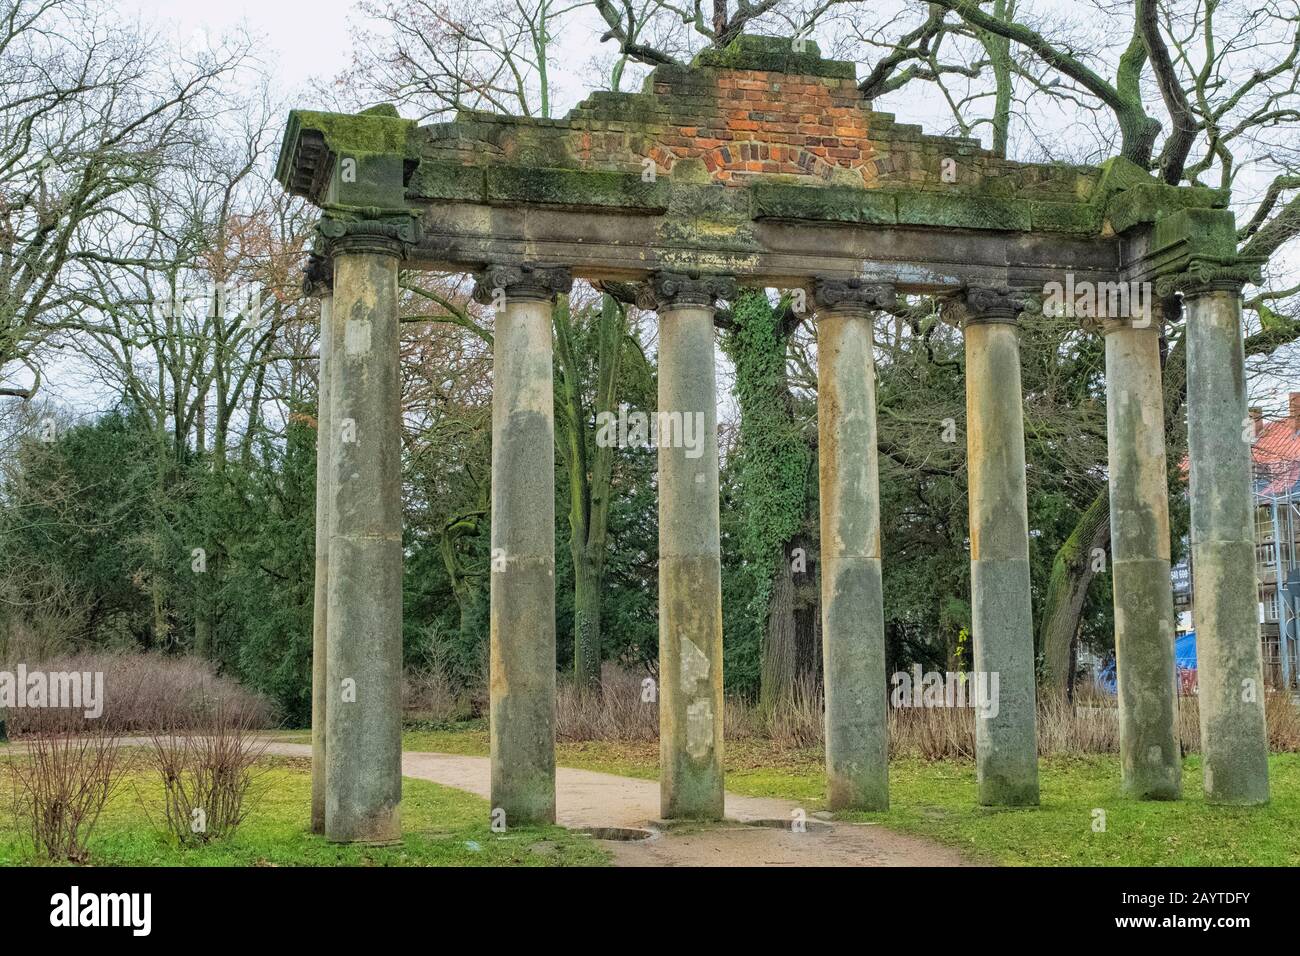 The Seven Pillars (Sieben Sauelen), also known at the Roman Ruins, at Dessau, in Saxony Anhalt, Germany. The Greek-style temple is a folly that stands Stock Photo